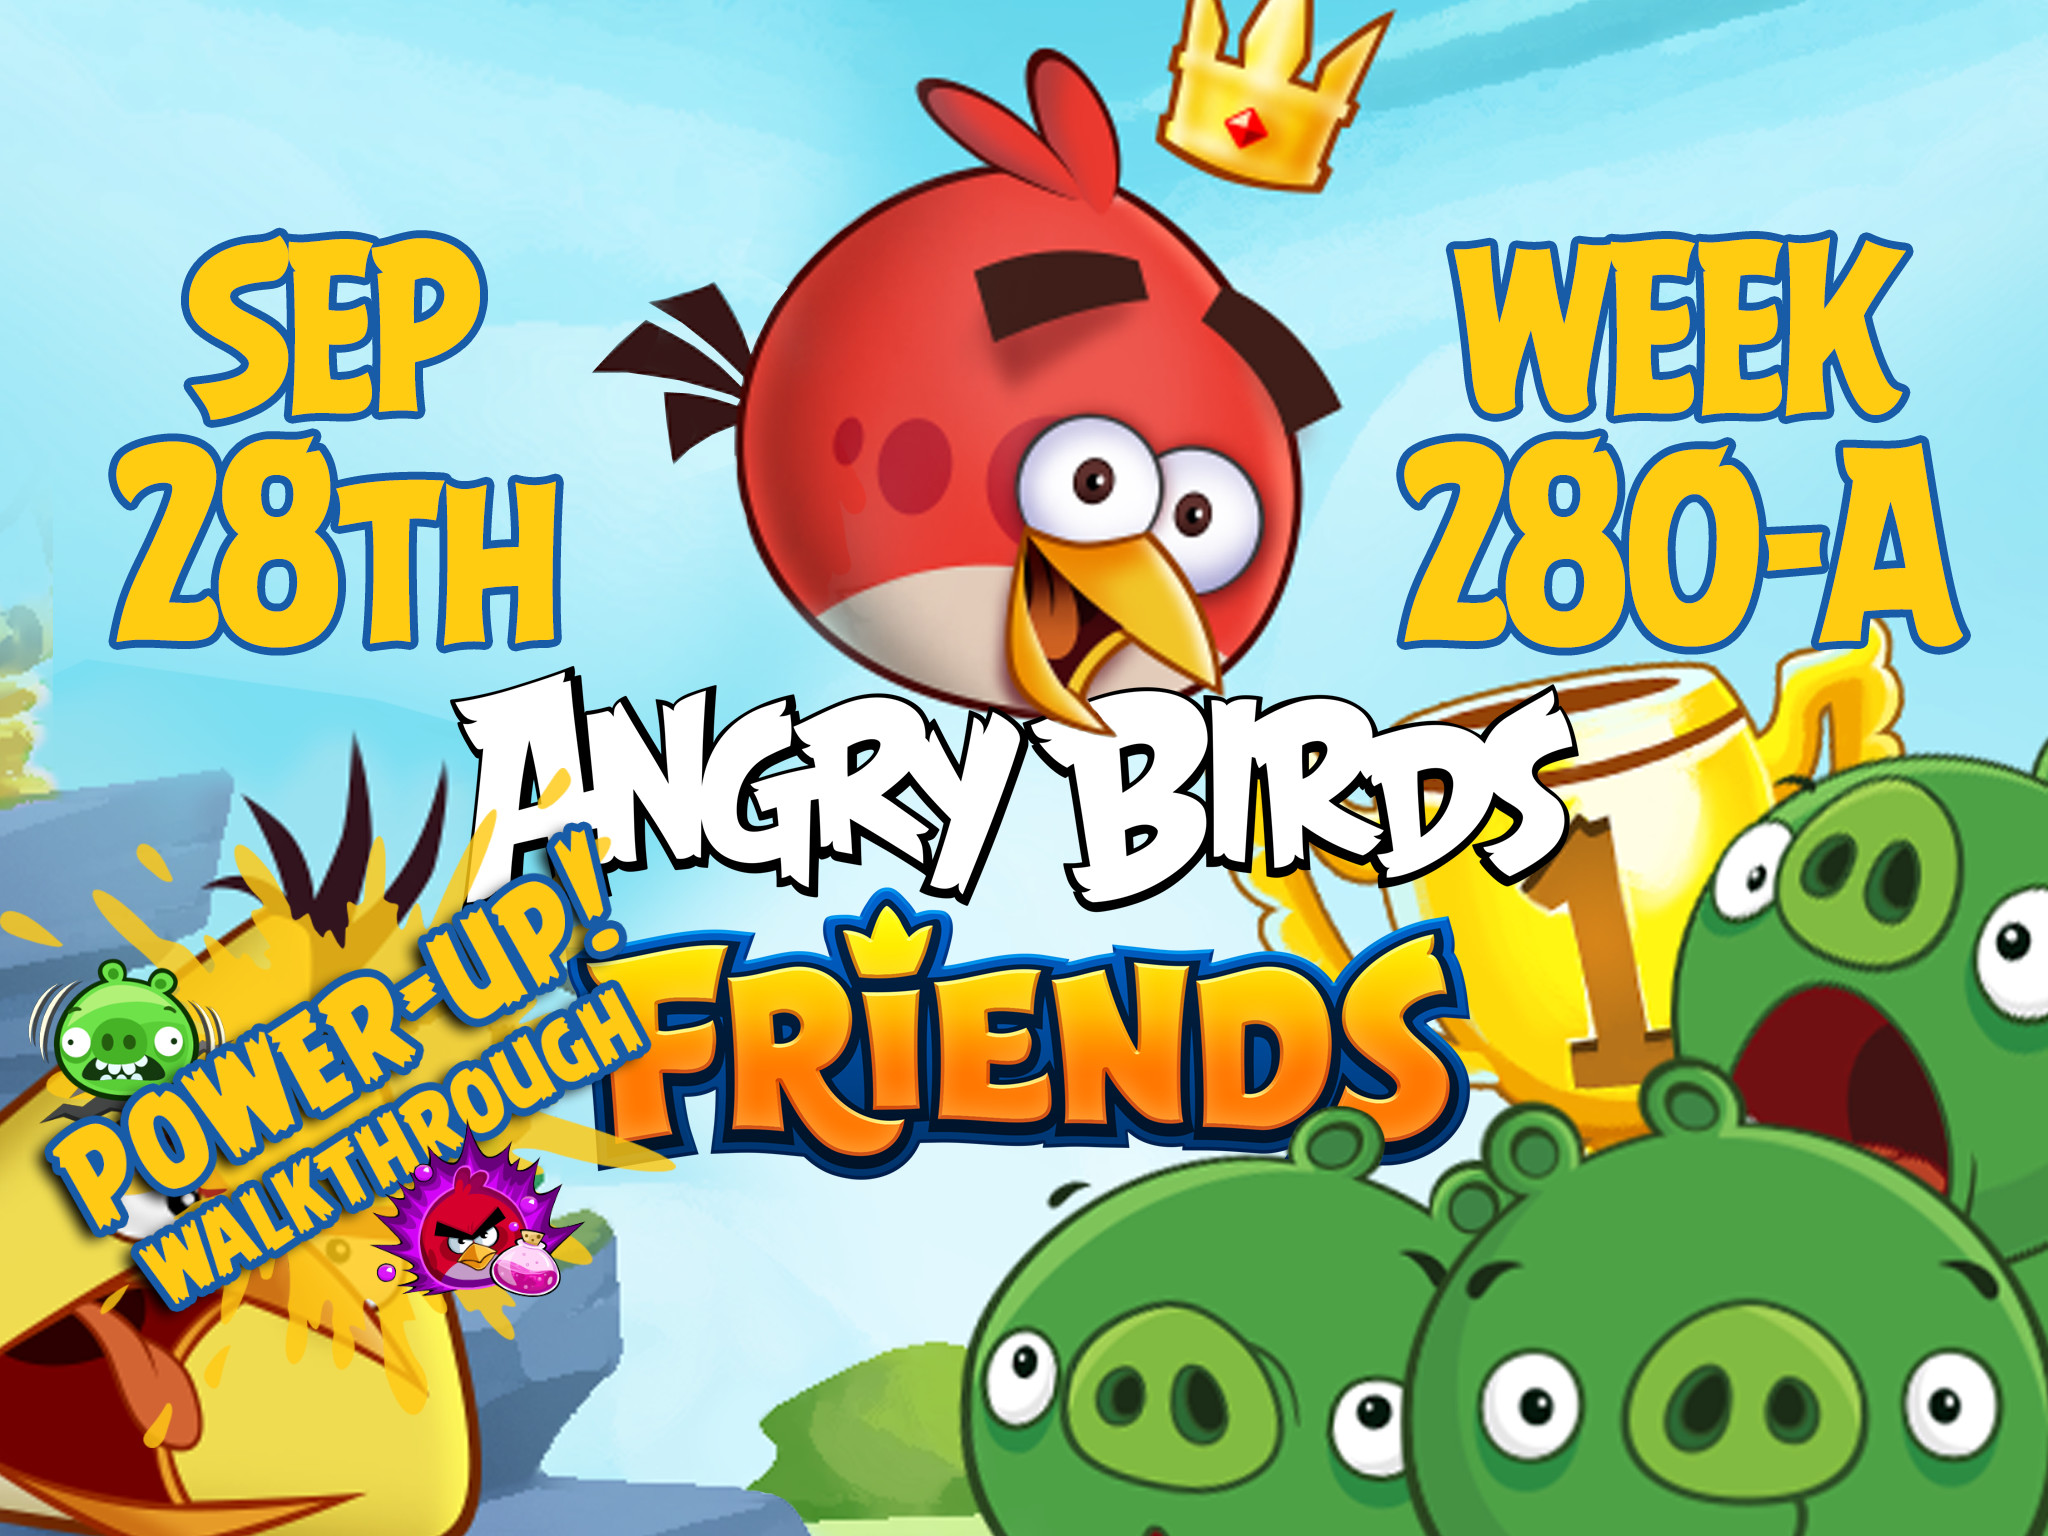 Angry Birds Friends Tournament Week 280-A Feature Image PU